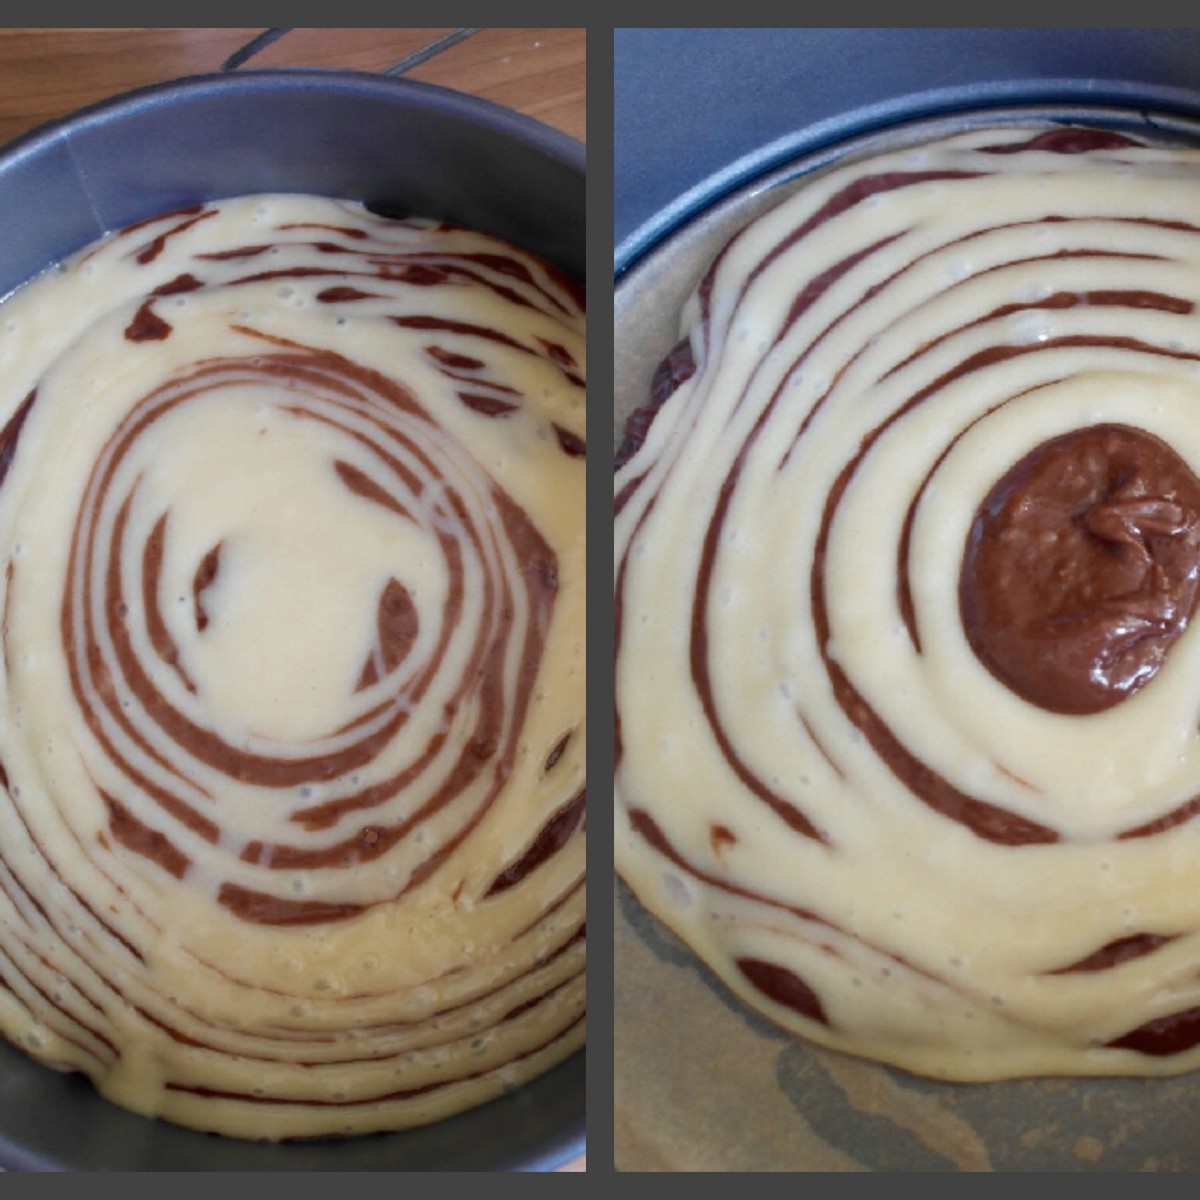 Melanie’s Food Adventures – Zebra Cake - Different Stages Of The Layering Process